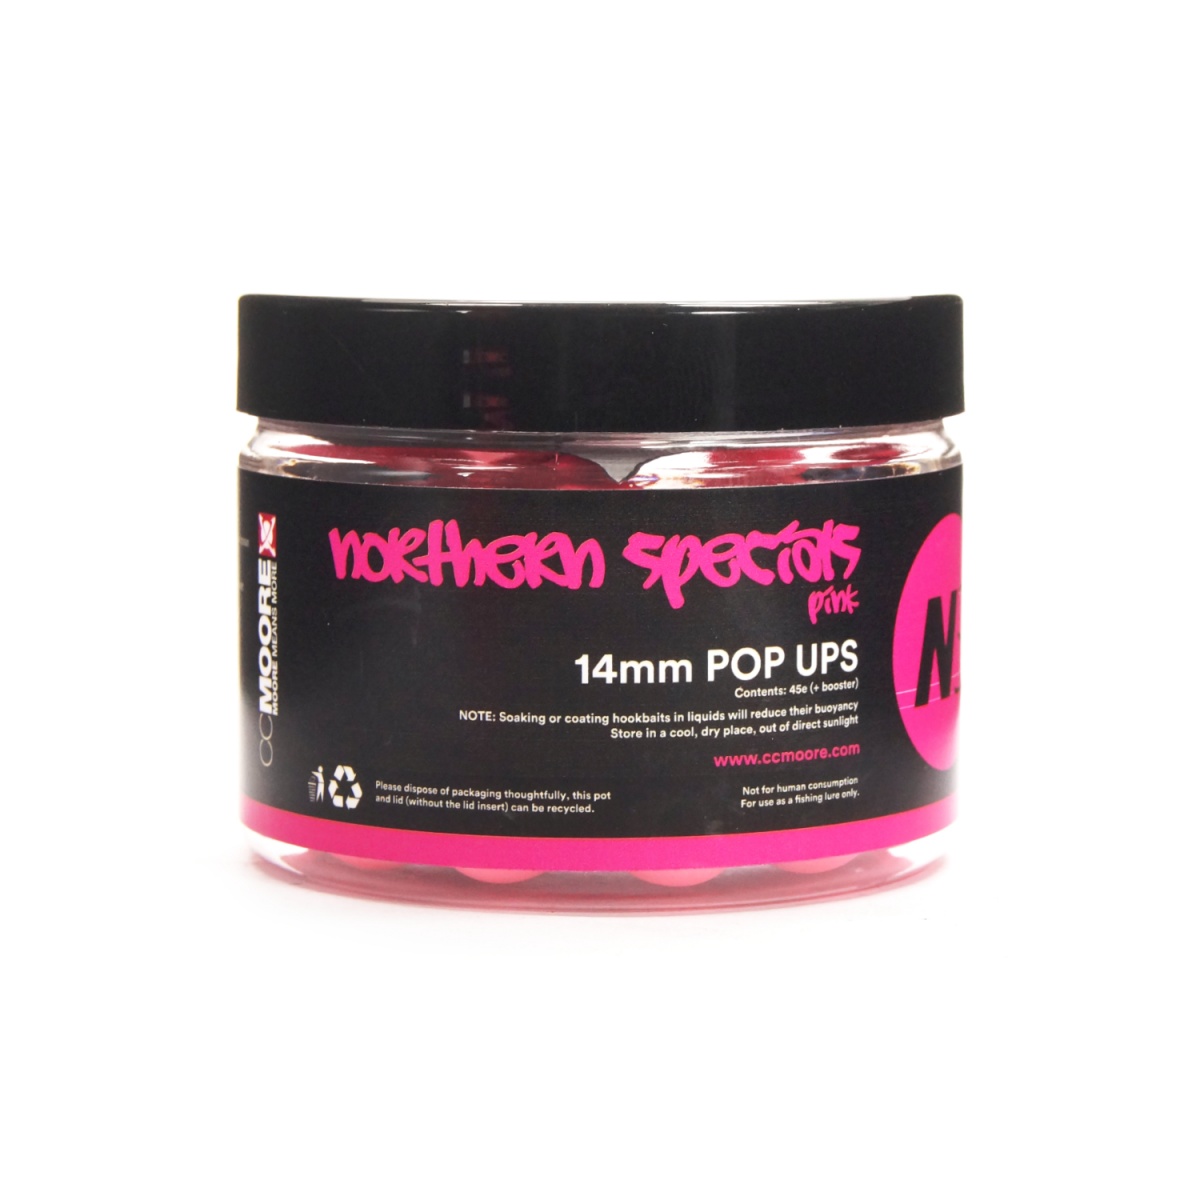 CcMoore Northern Special NS1 Pink Pop Ups 14 mm rozmiar